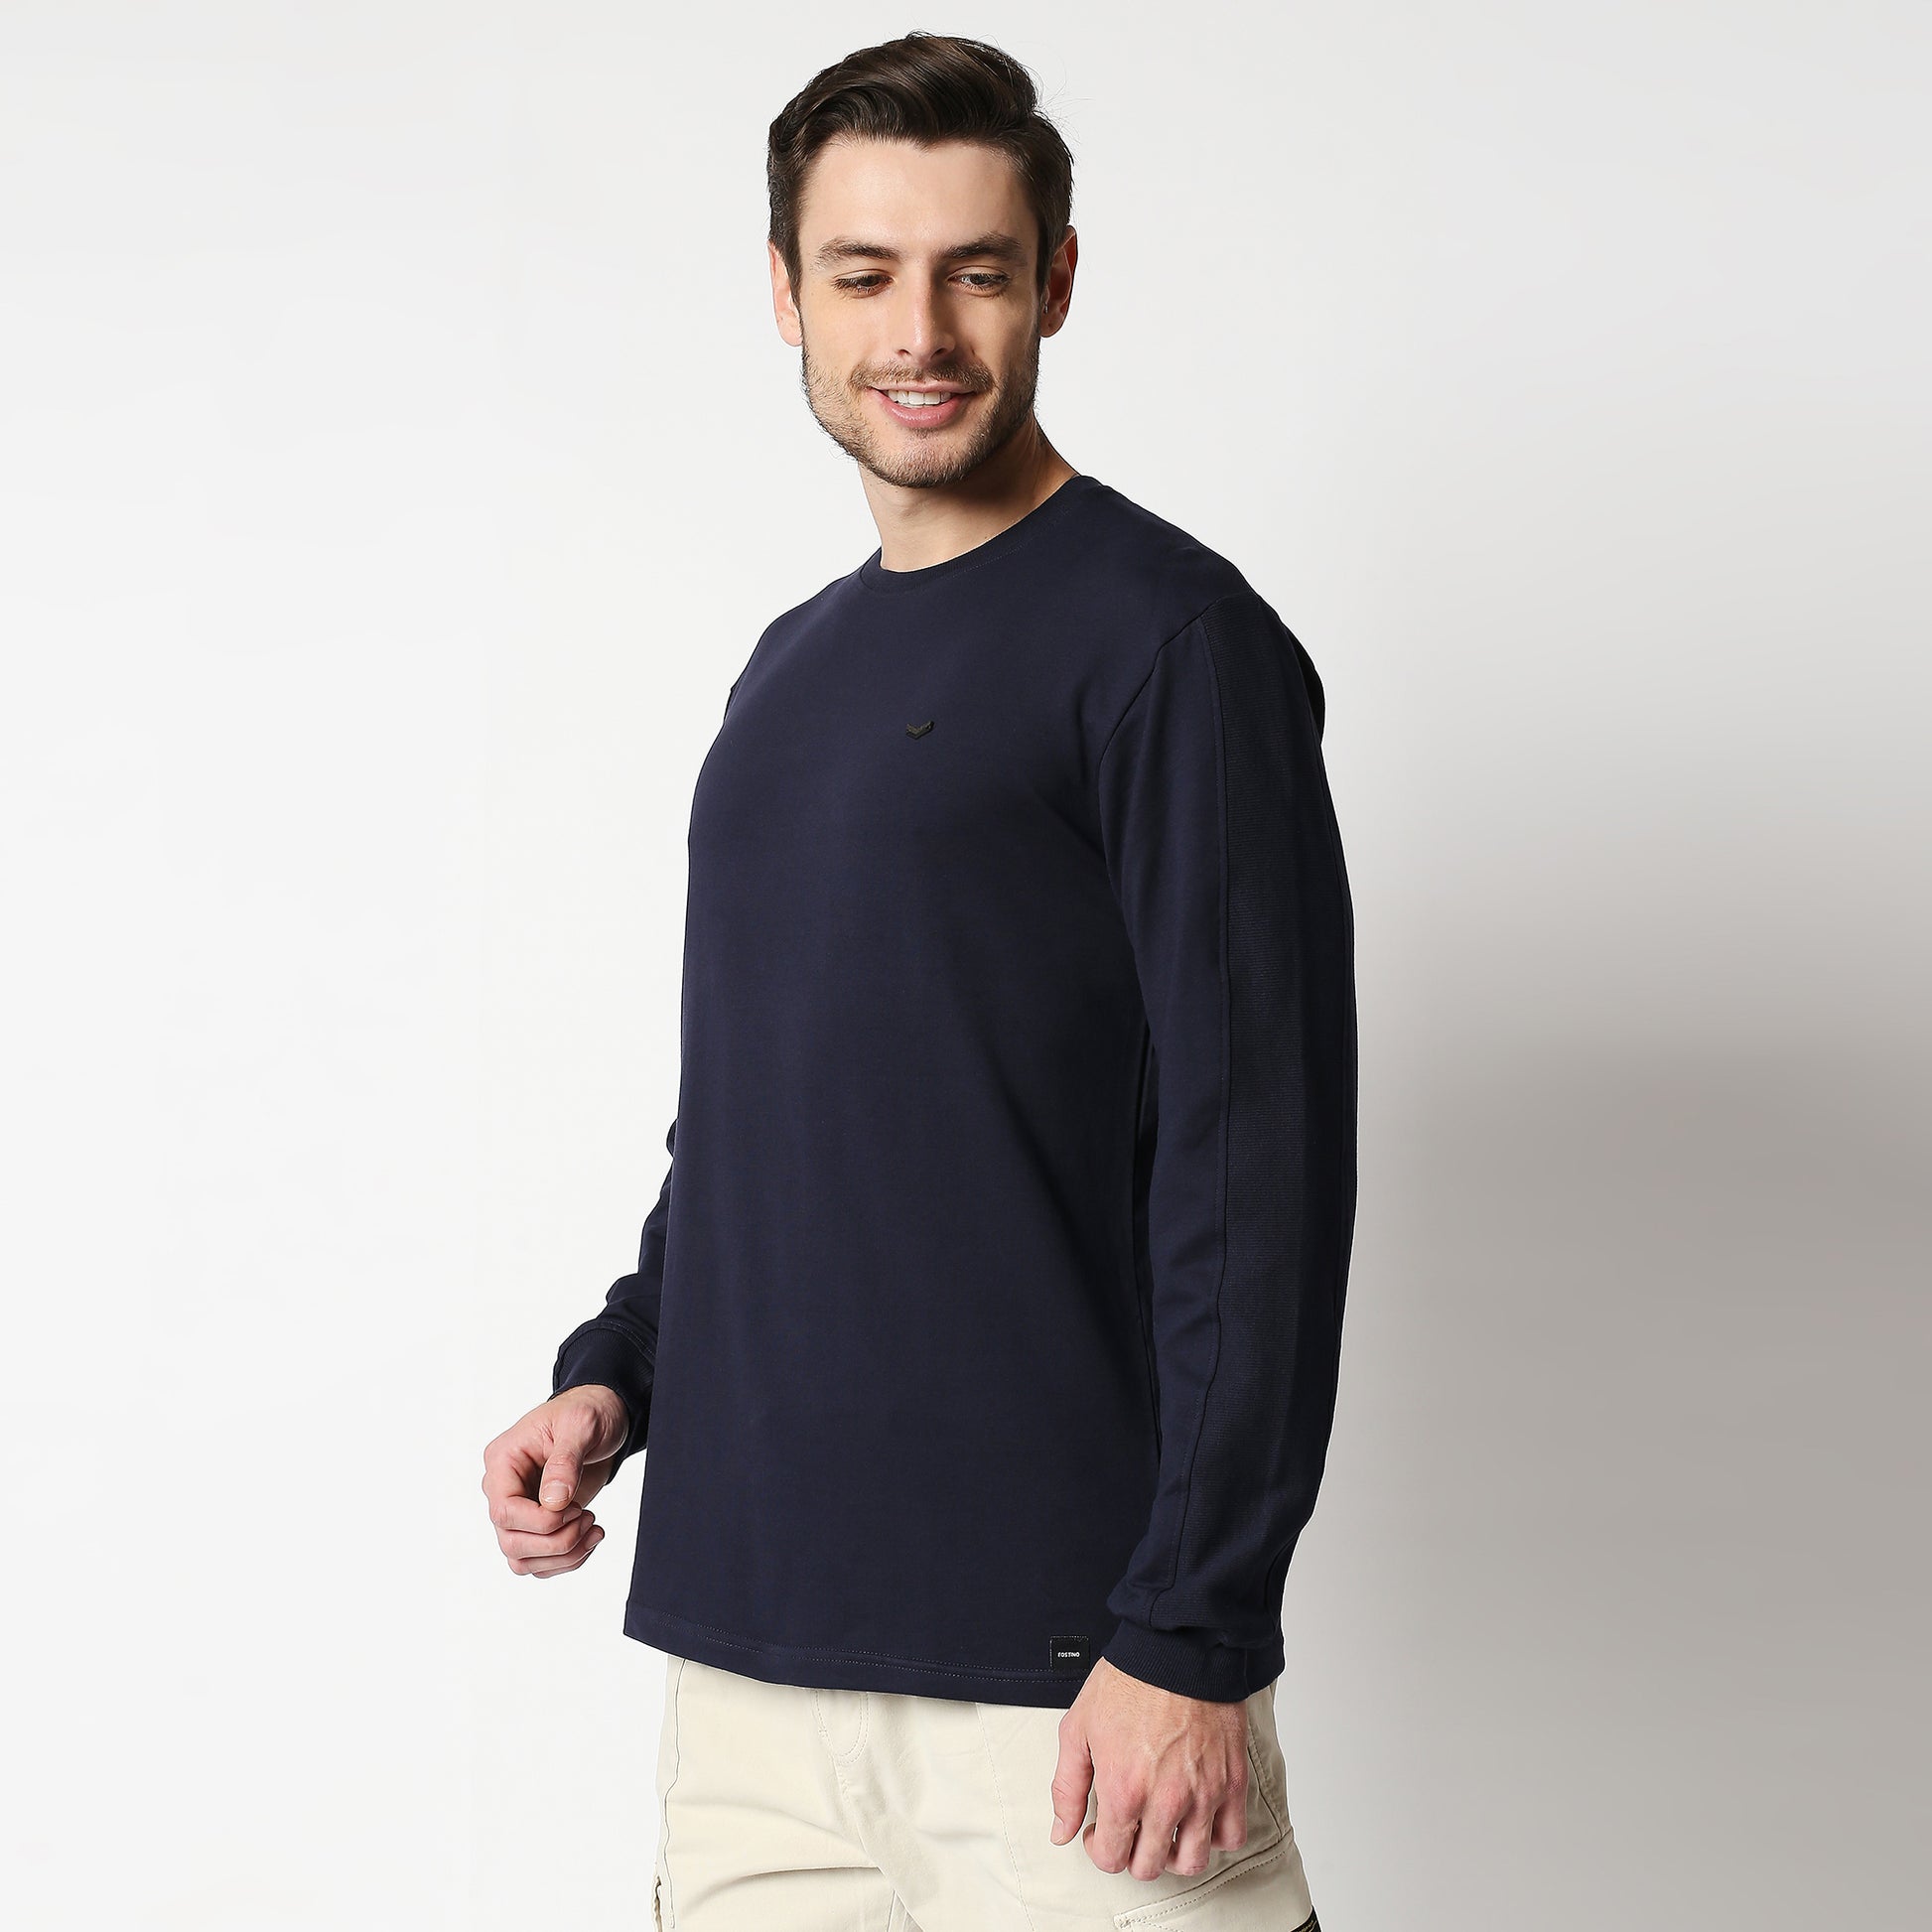 Fostino Navy Blue Pullover Full Sleeves T-Shirt with Rib on Sleeves - Fostino - T-Shirts